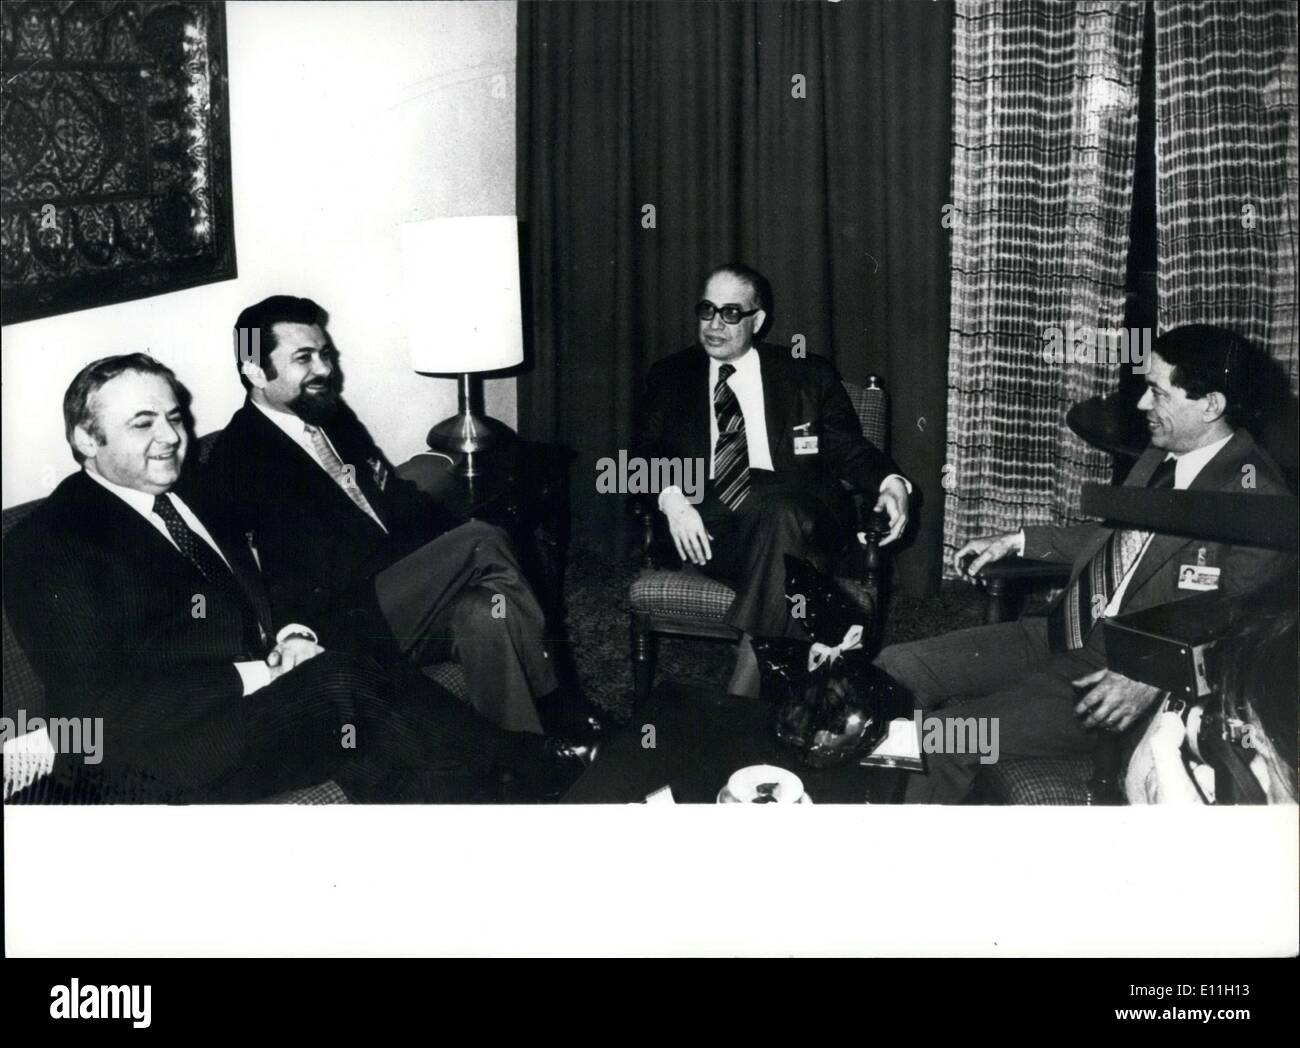 Dec. 20, 1977 - Egyptian And Israeli Peace Negotiators Meet In Cairo: Photo shows a meeting between the Egyptian and ad Israeli Stock Photo